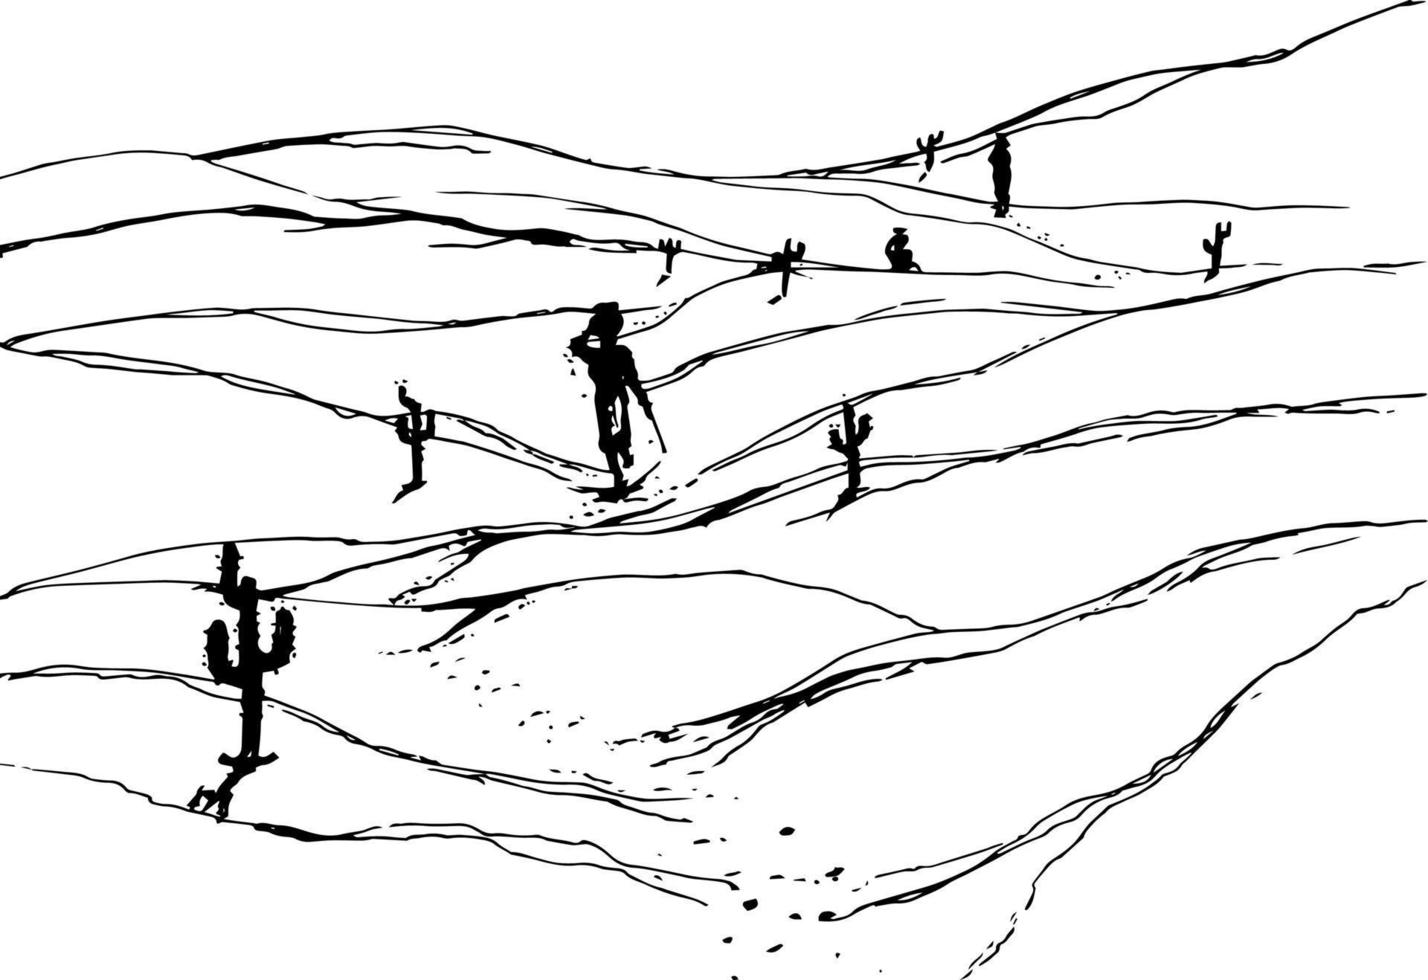 Hand drawn vector nature illustration with sketch with a man walking on the desert.